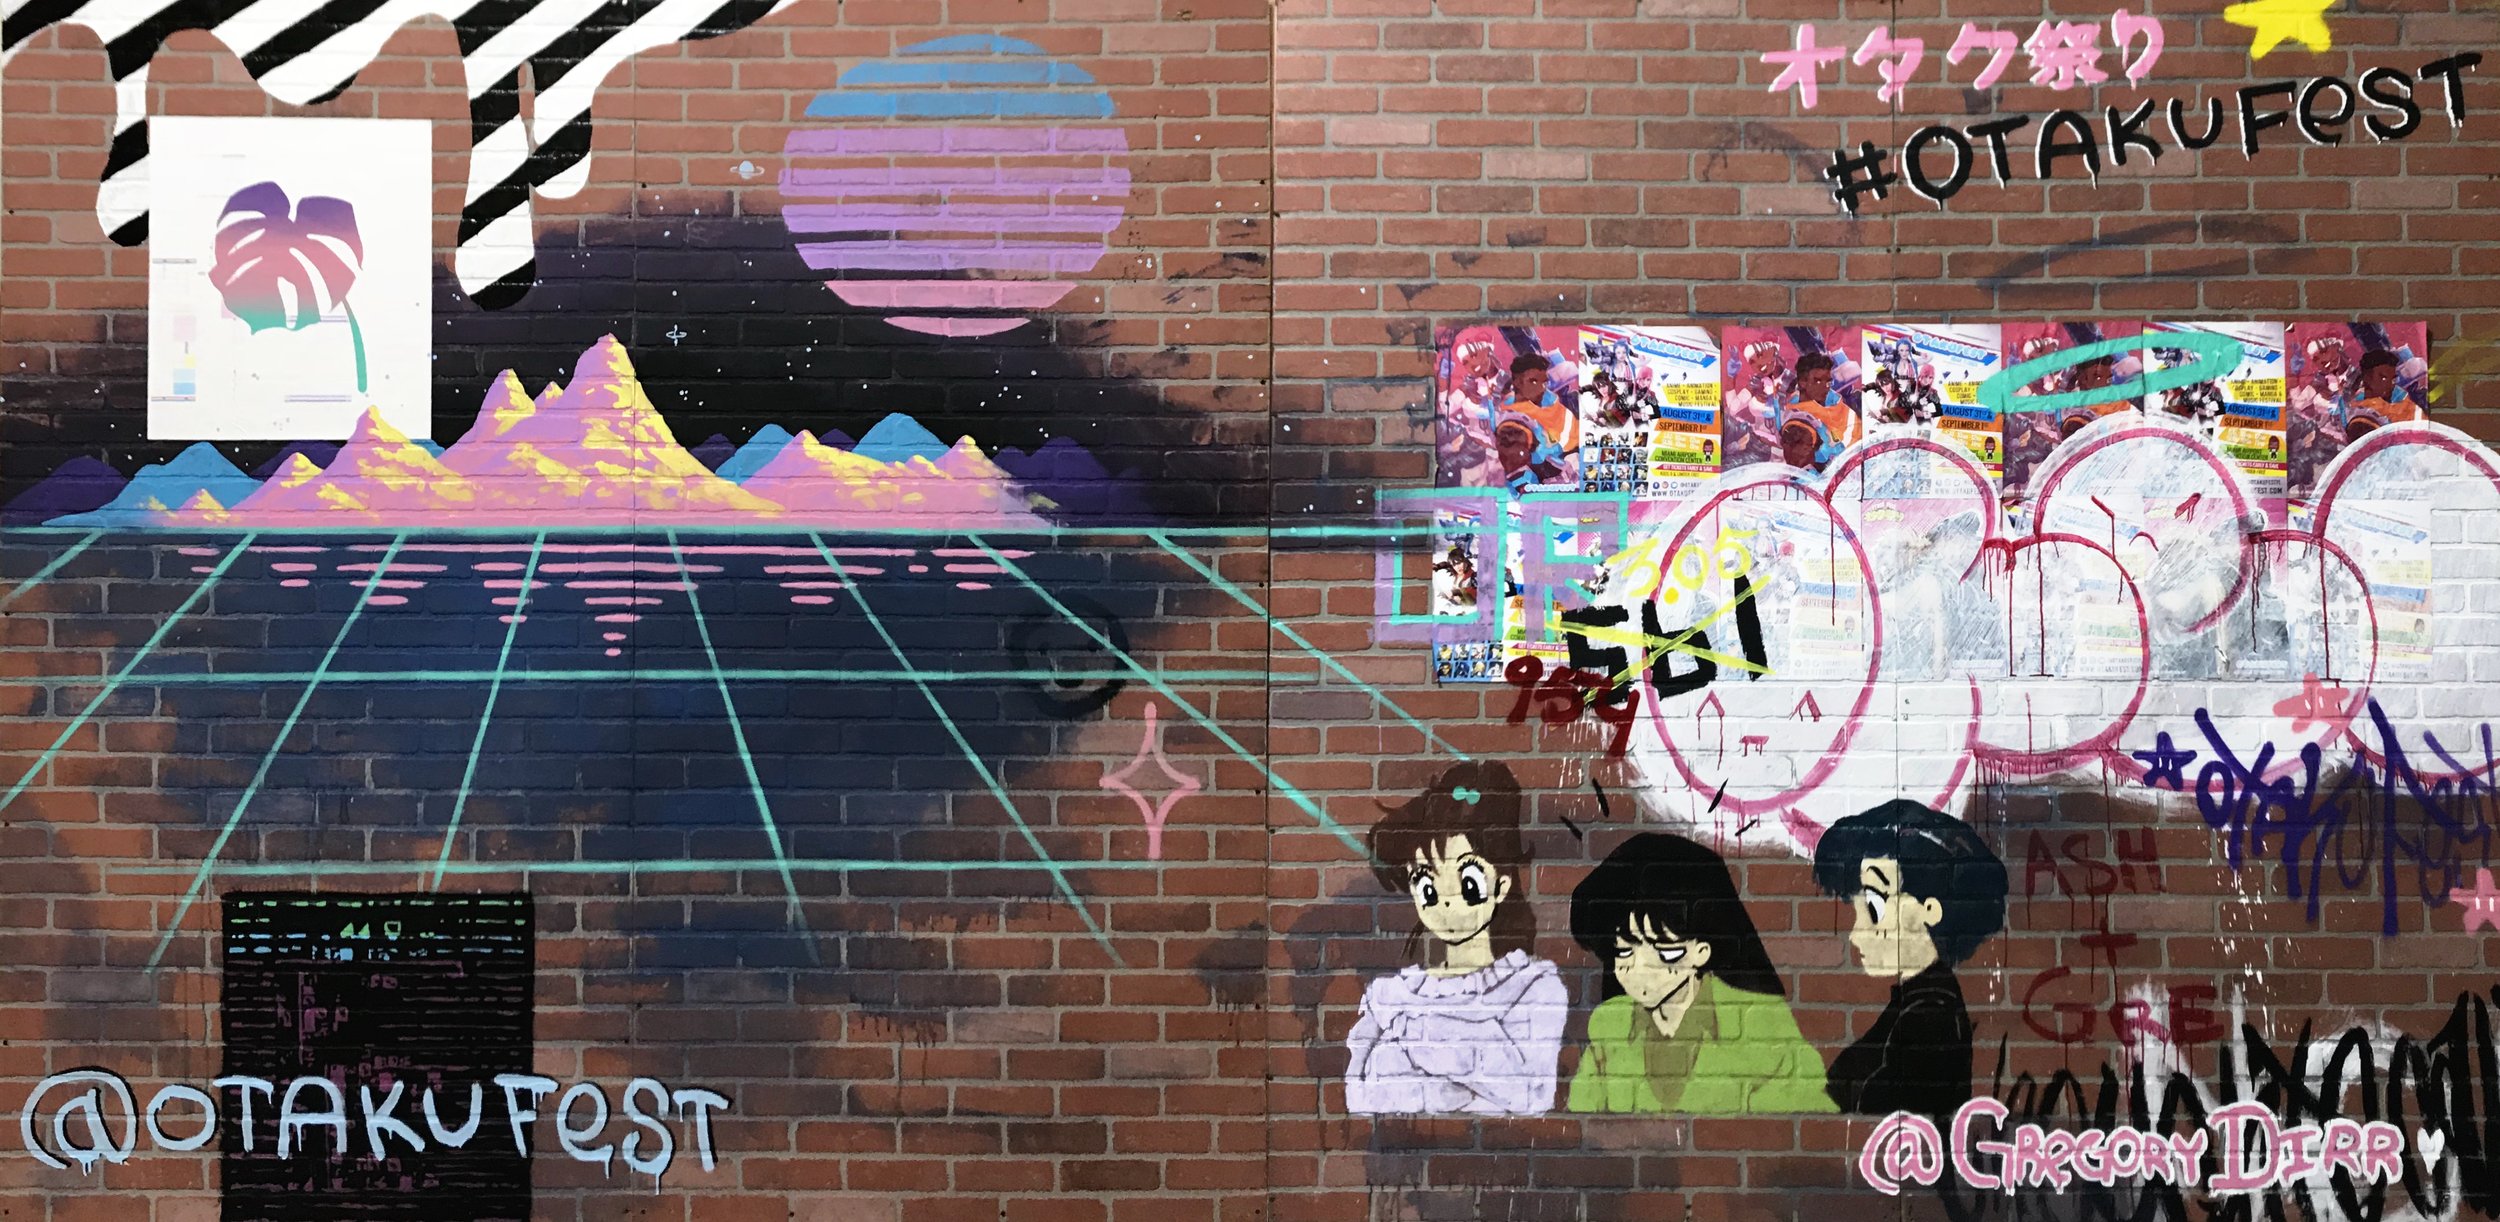   Otakufest  acrylic, spray paint, collage on wood wall facade. 2019    commissioned by Otakufest, Miami   